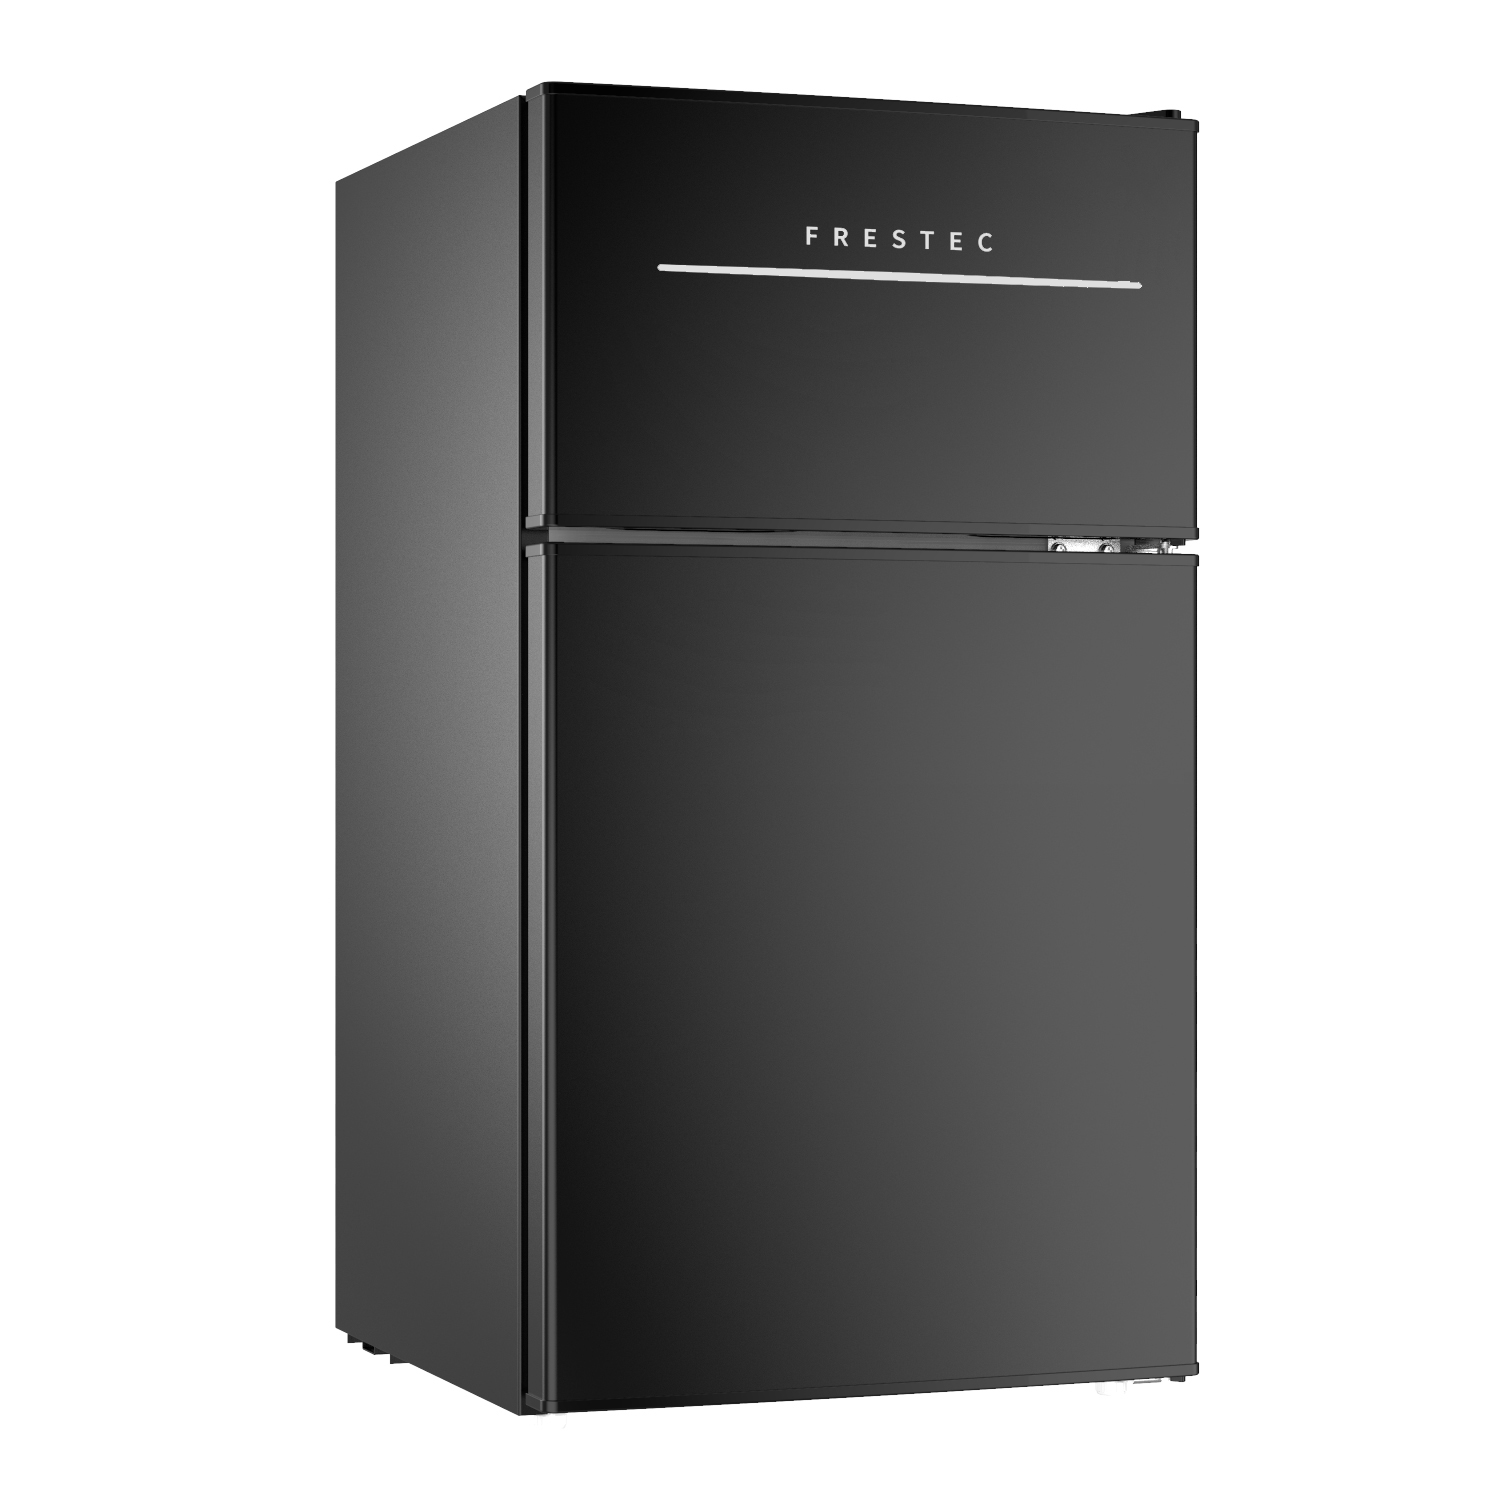 3.2 Cu.Ft Compact Refrigerator with Freezer, 2 Door Mini Fridge with 2  Wheels 37dB Quiet, 7- Settings Mechanical Thermostat, E-Star Rated Small  Refrigerator for Office, Dorm, Bedroom or Garage, Black 